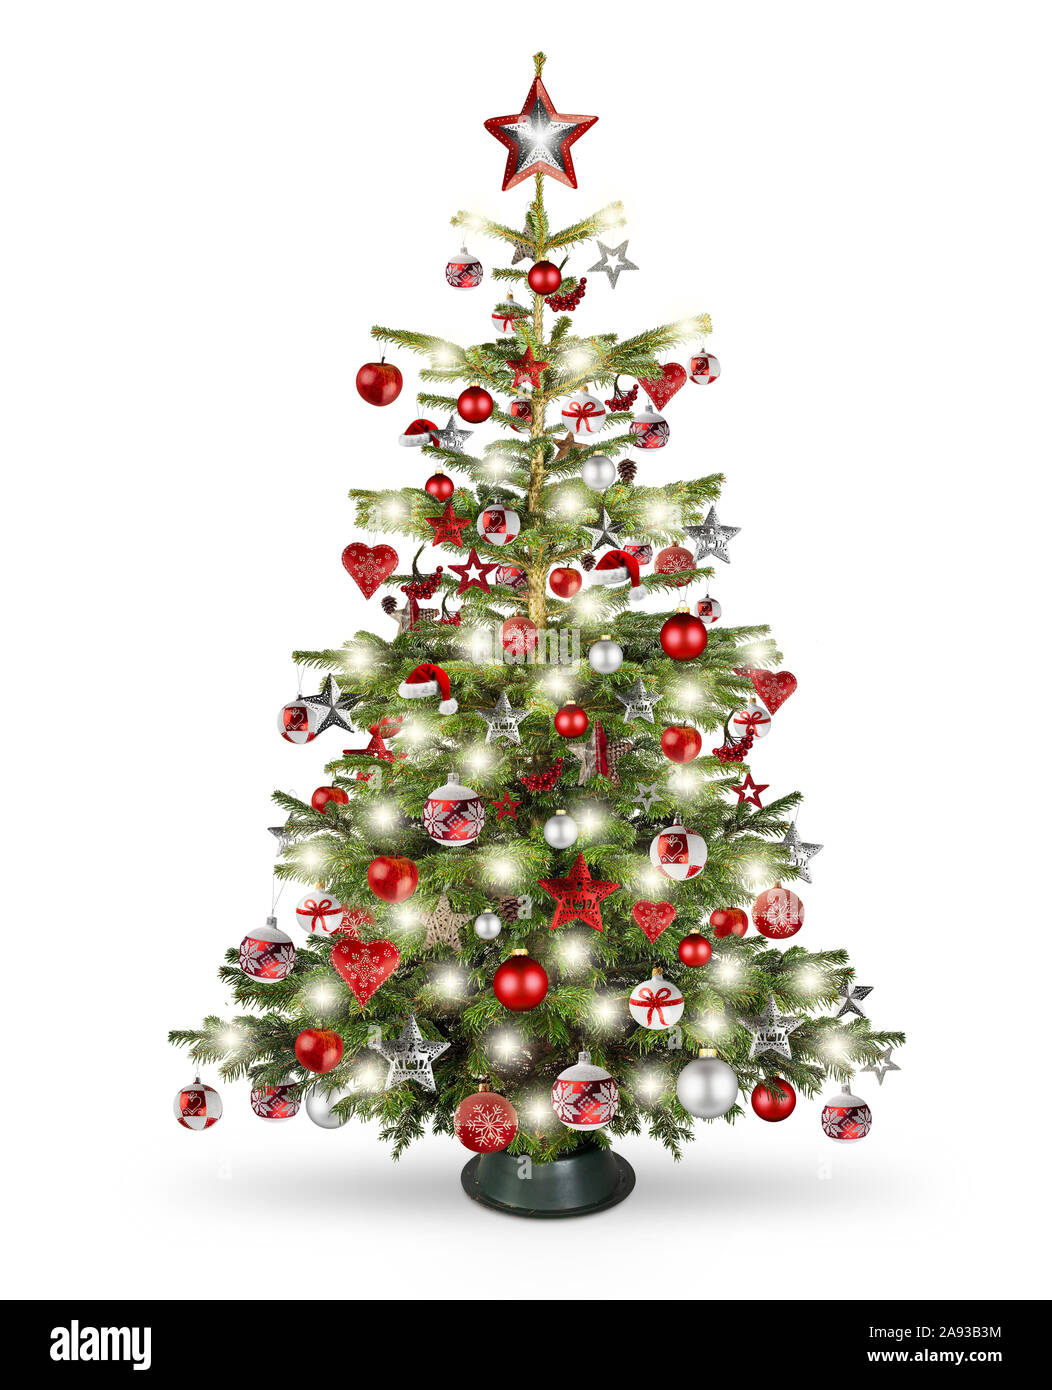 Real christmas tree Cut Out Stock Images & Pictures - Alamy